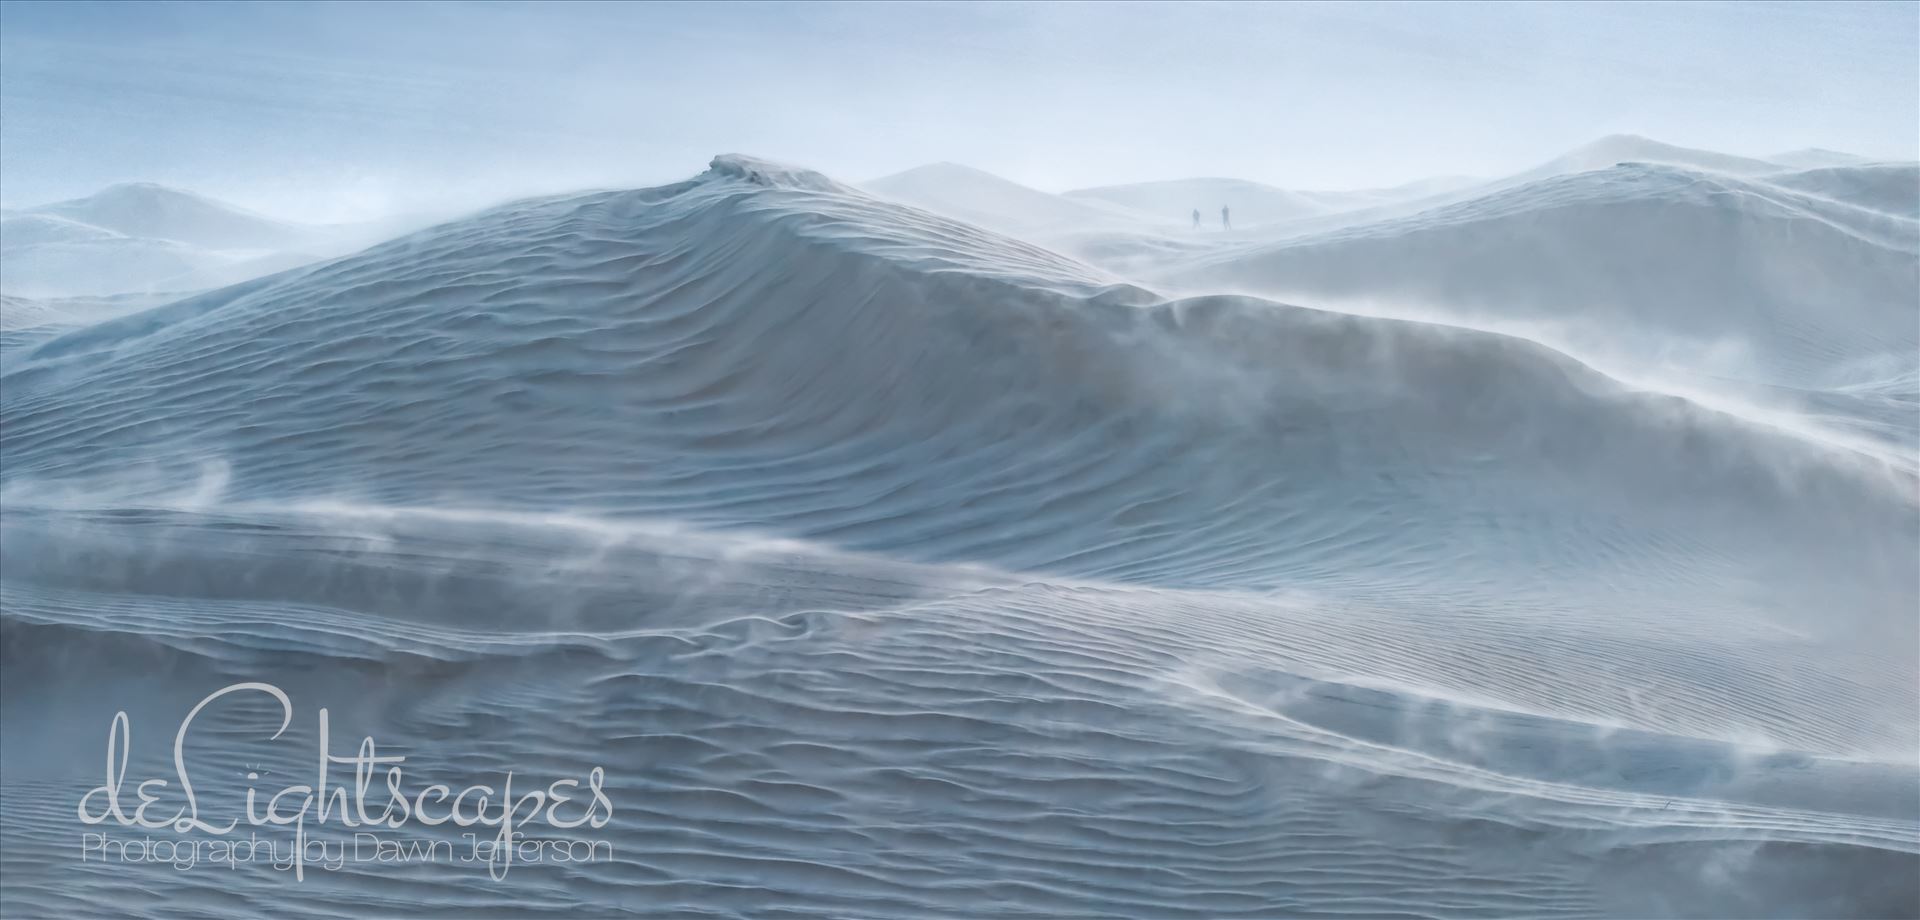 Rough Seas Mesquite Dunes at blue hour during a wind storm with 30 mph sustained winds and 50-60 mph gusts. The dunes looked like a storm tossed sea especially the large dune which appears to be a cresting wave and the blowing sand is reminiscent of sea spray. by Dawn Jefferson